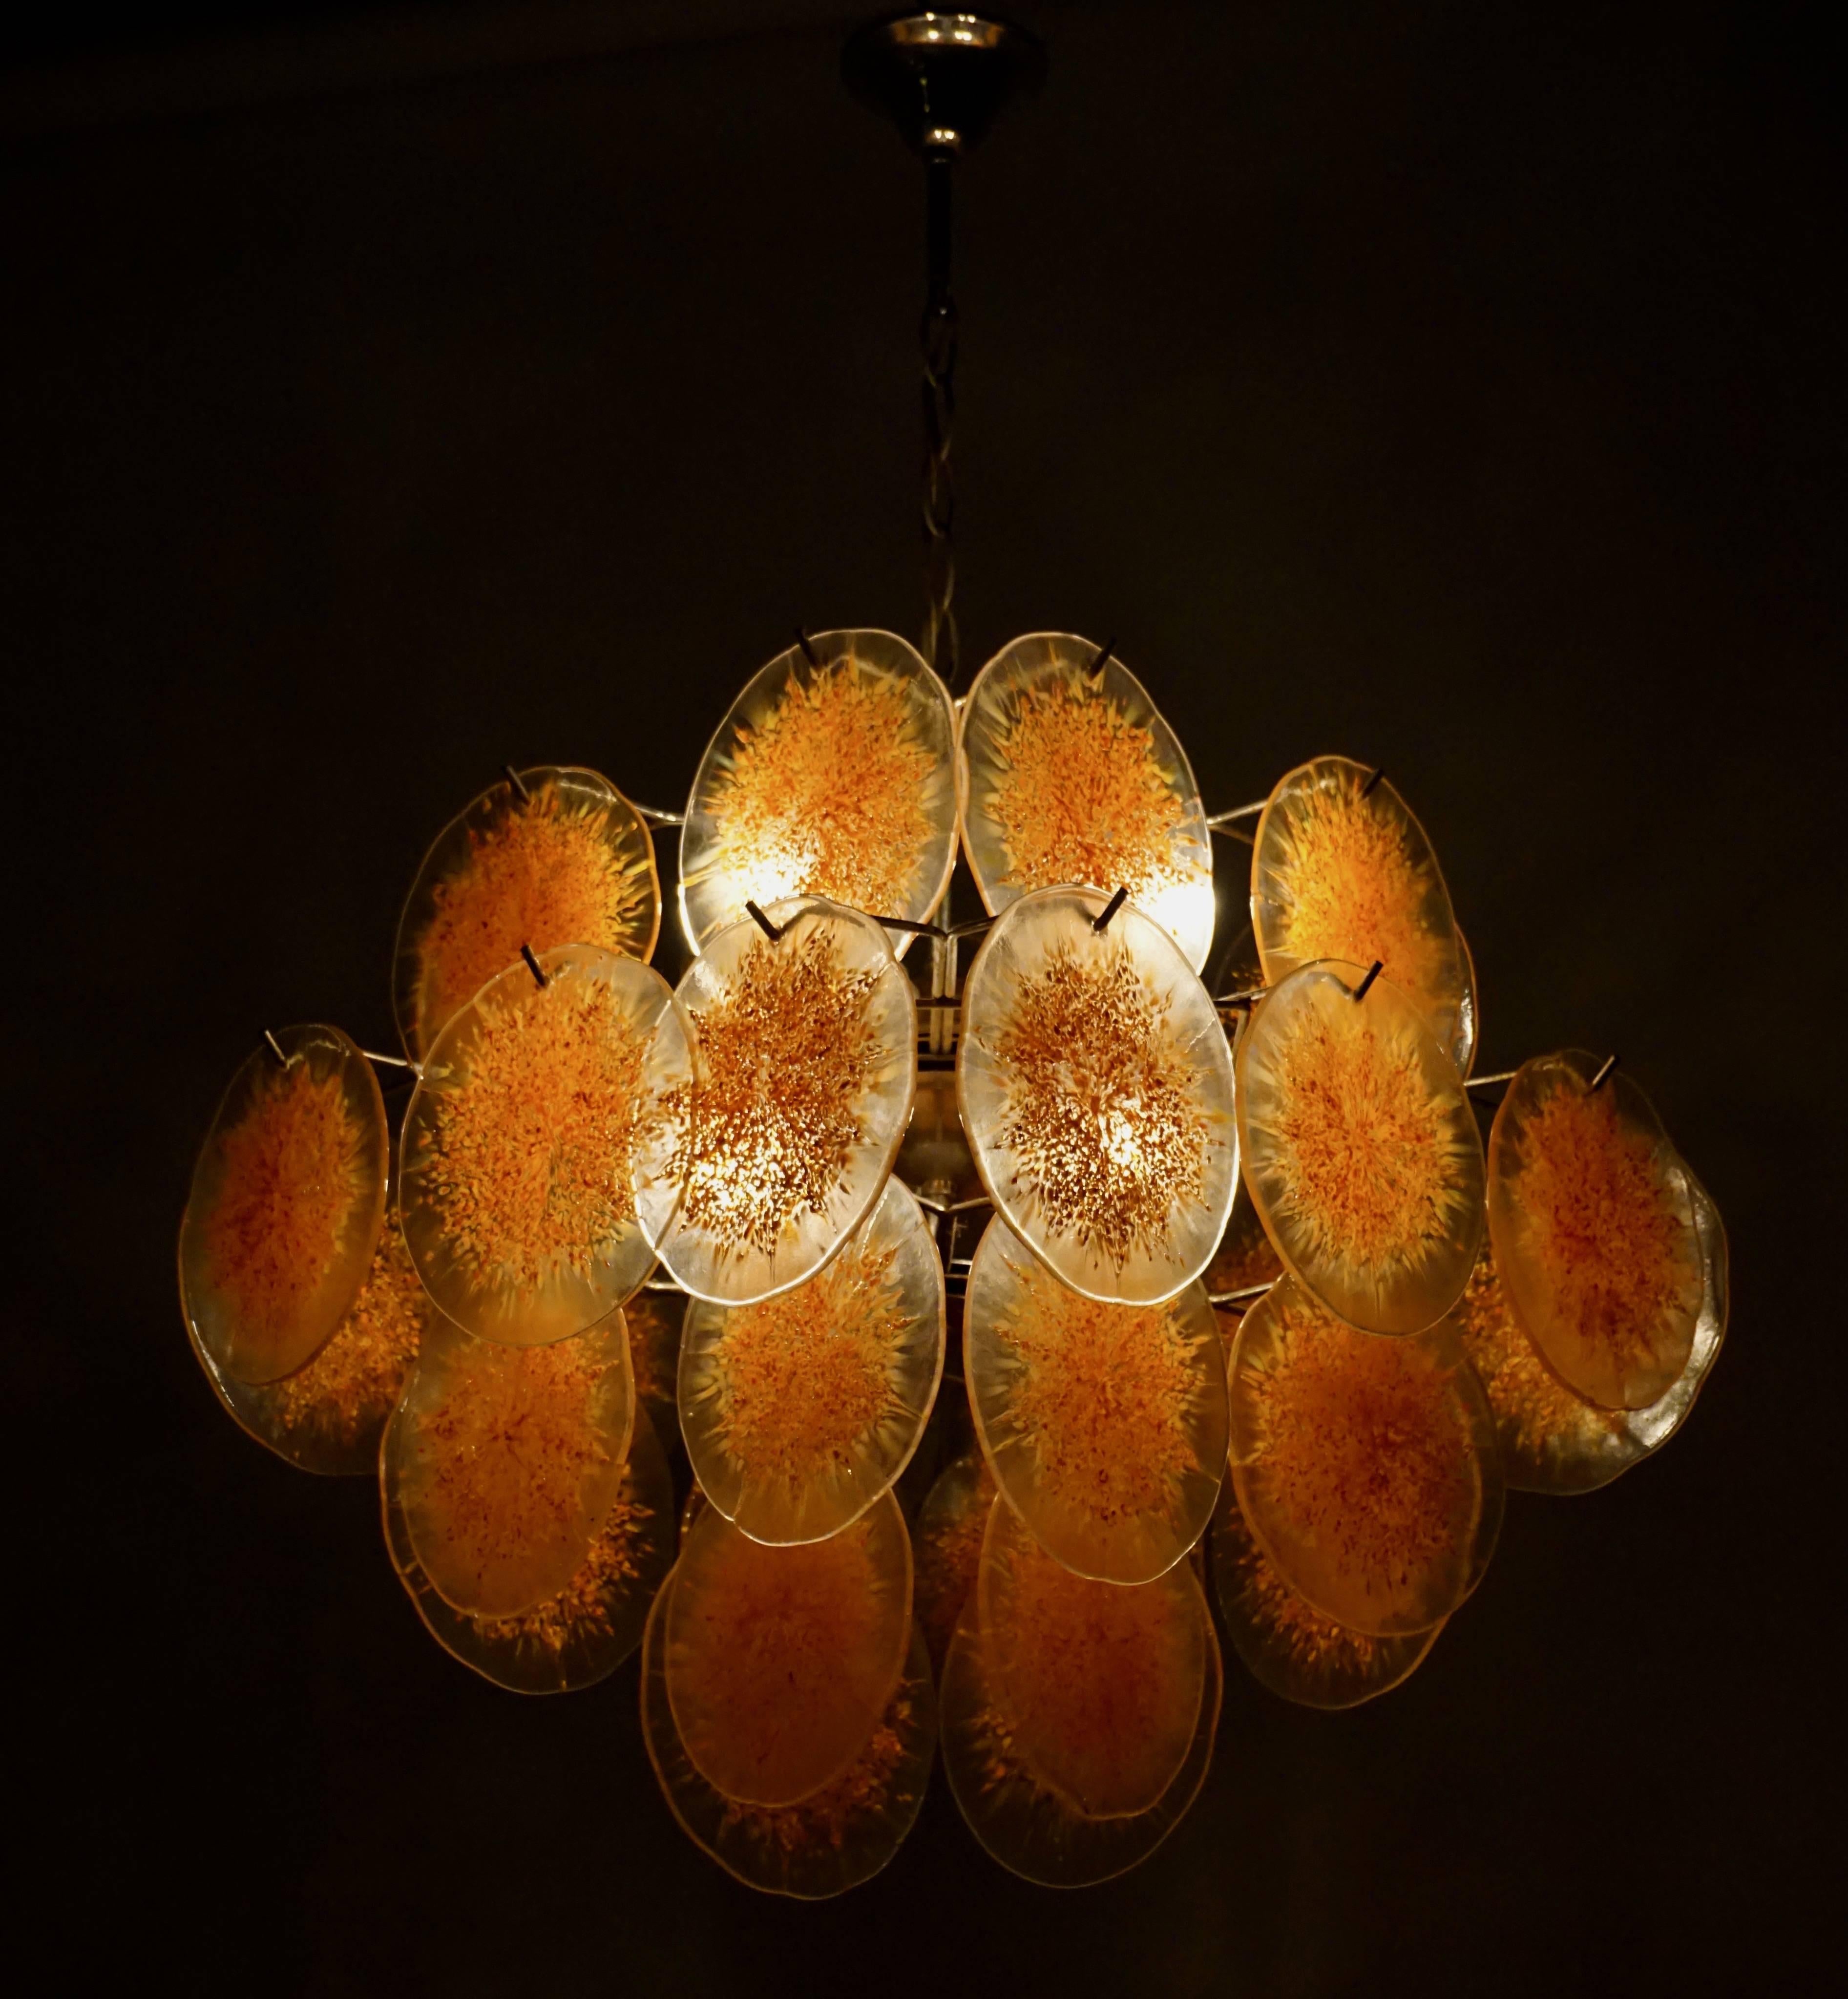 Italy,
1960 - 1970.
Wonderful created Vistosi light with very large glass discs. The chandelier has a very 'fresh look' due to the clear orange glass discs. These glass discs are hand produced which gives a superb light partition. This handcrafted